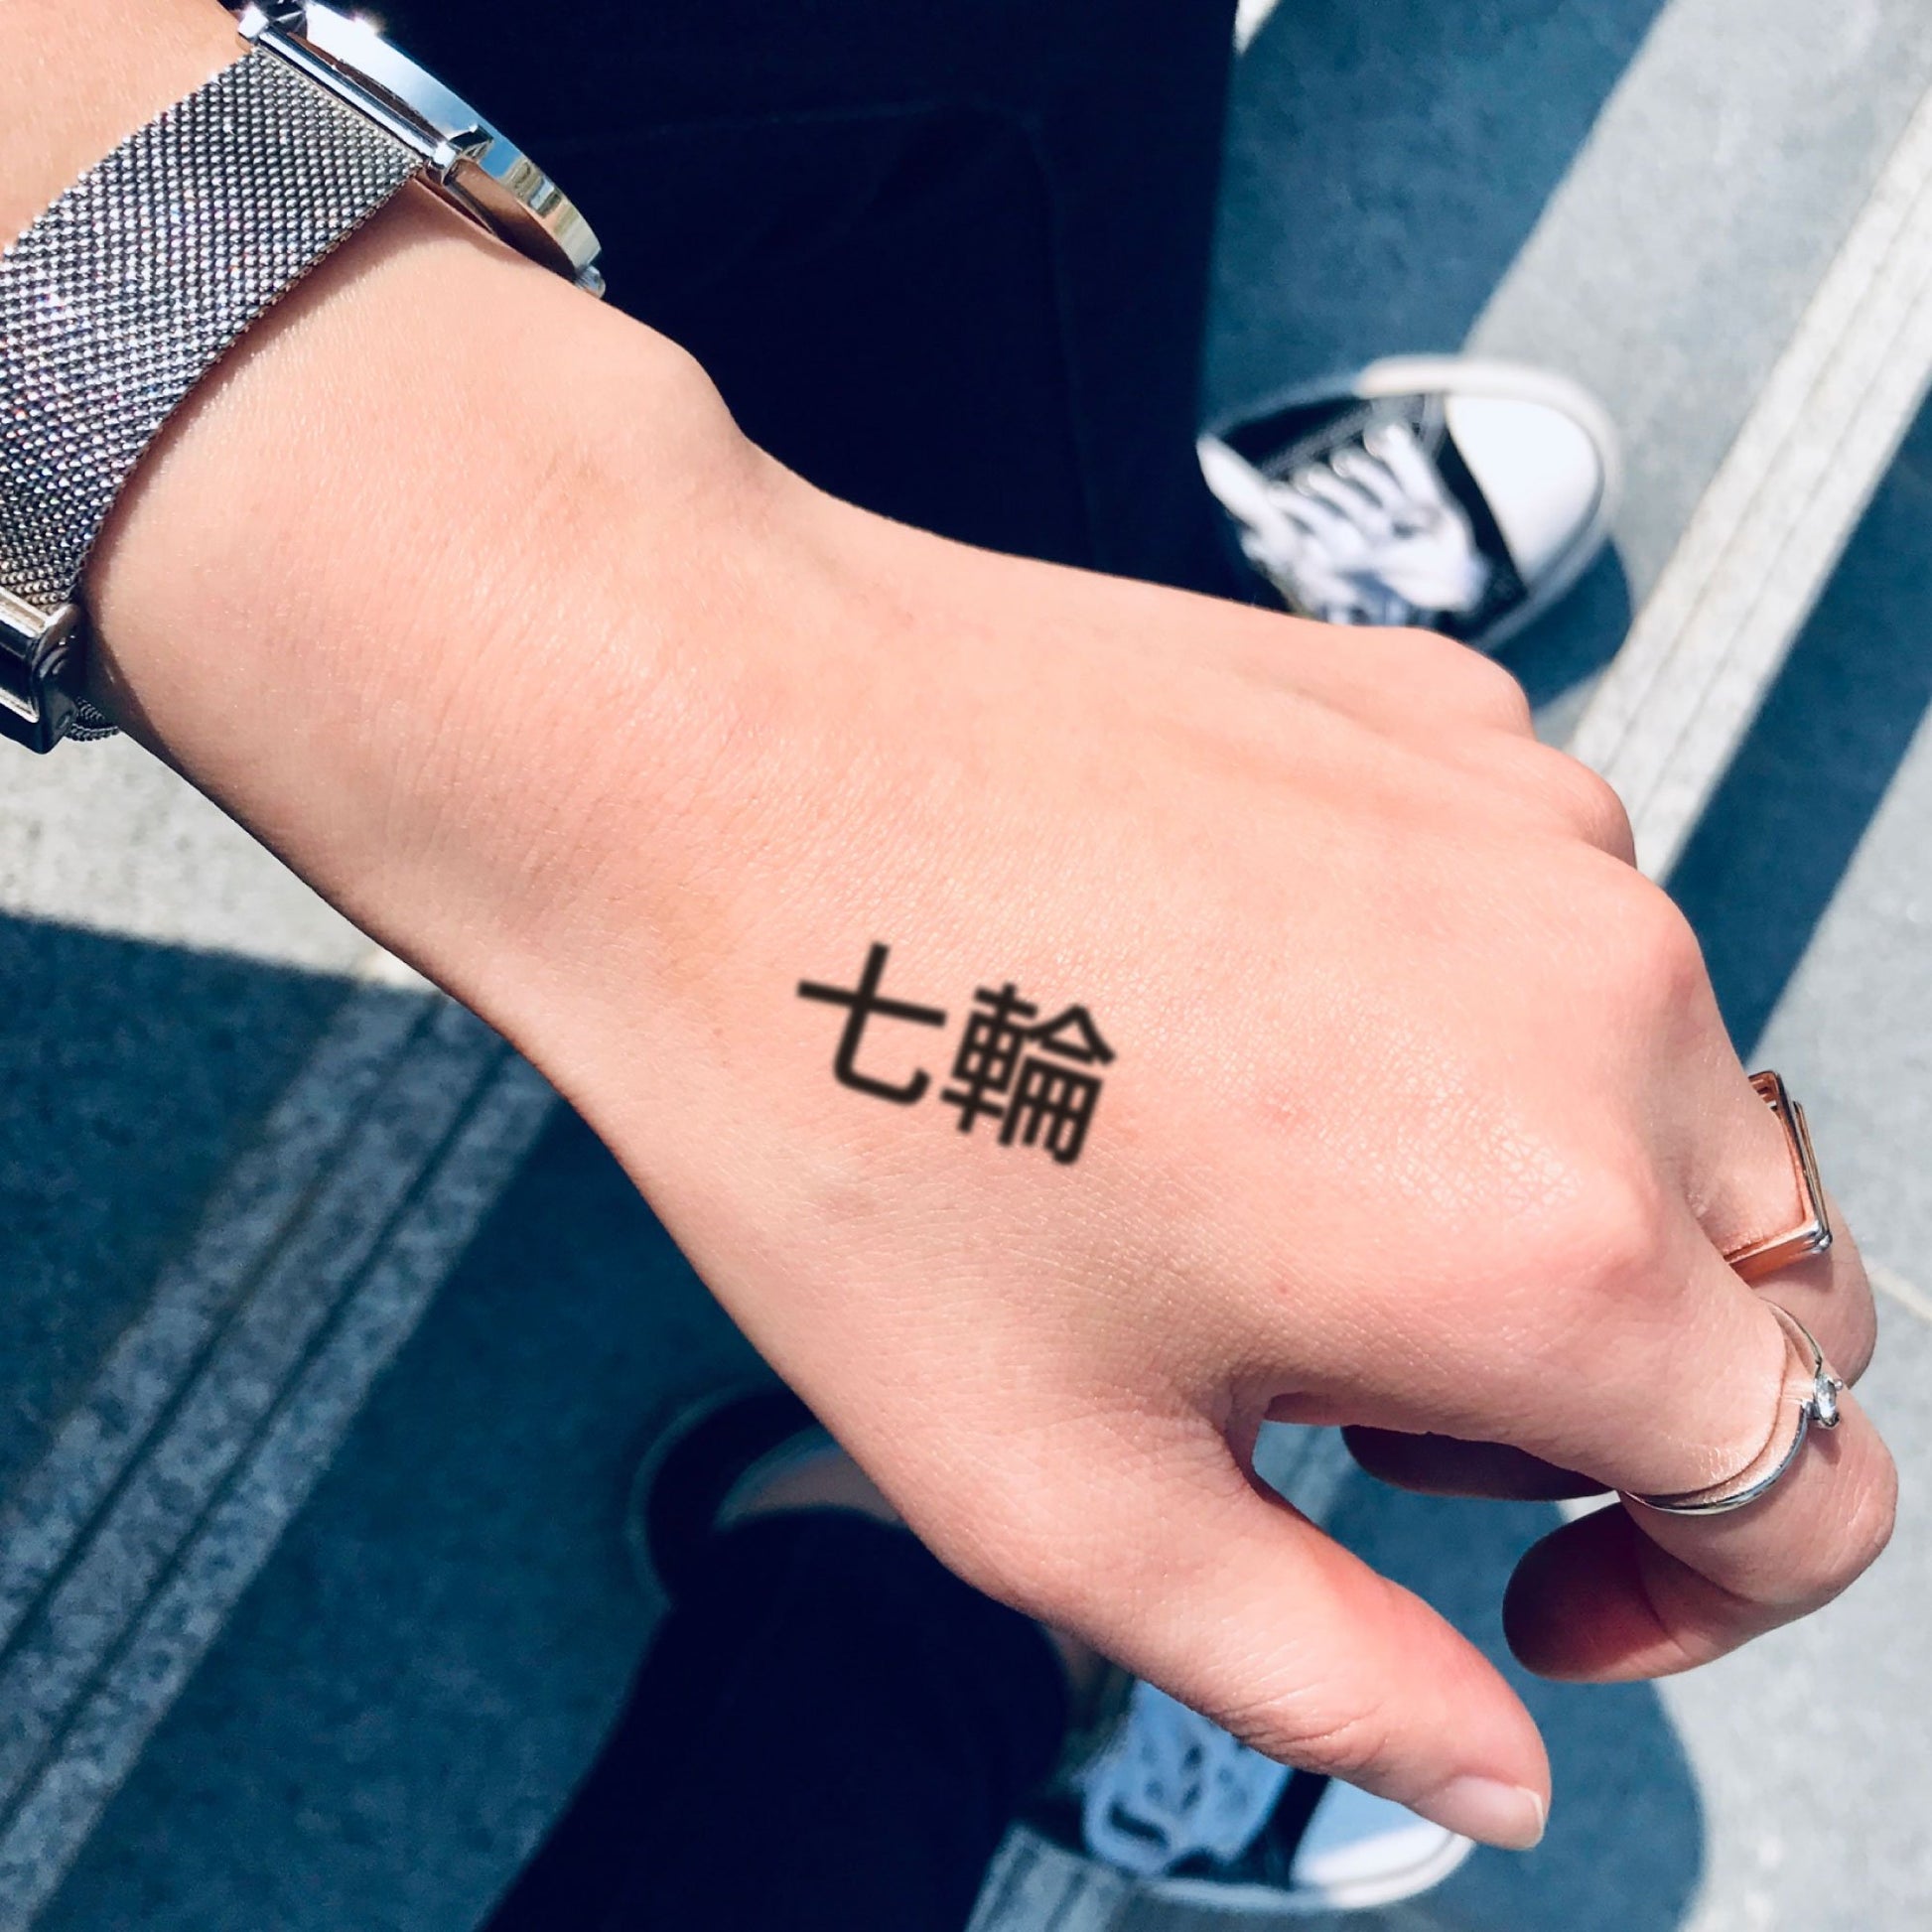 fake small ariana grande 7 seven rings lyrics bbq grill japanese chinese characters hand lettering temporary tattoo sticker design idea on hand